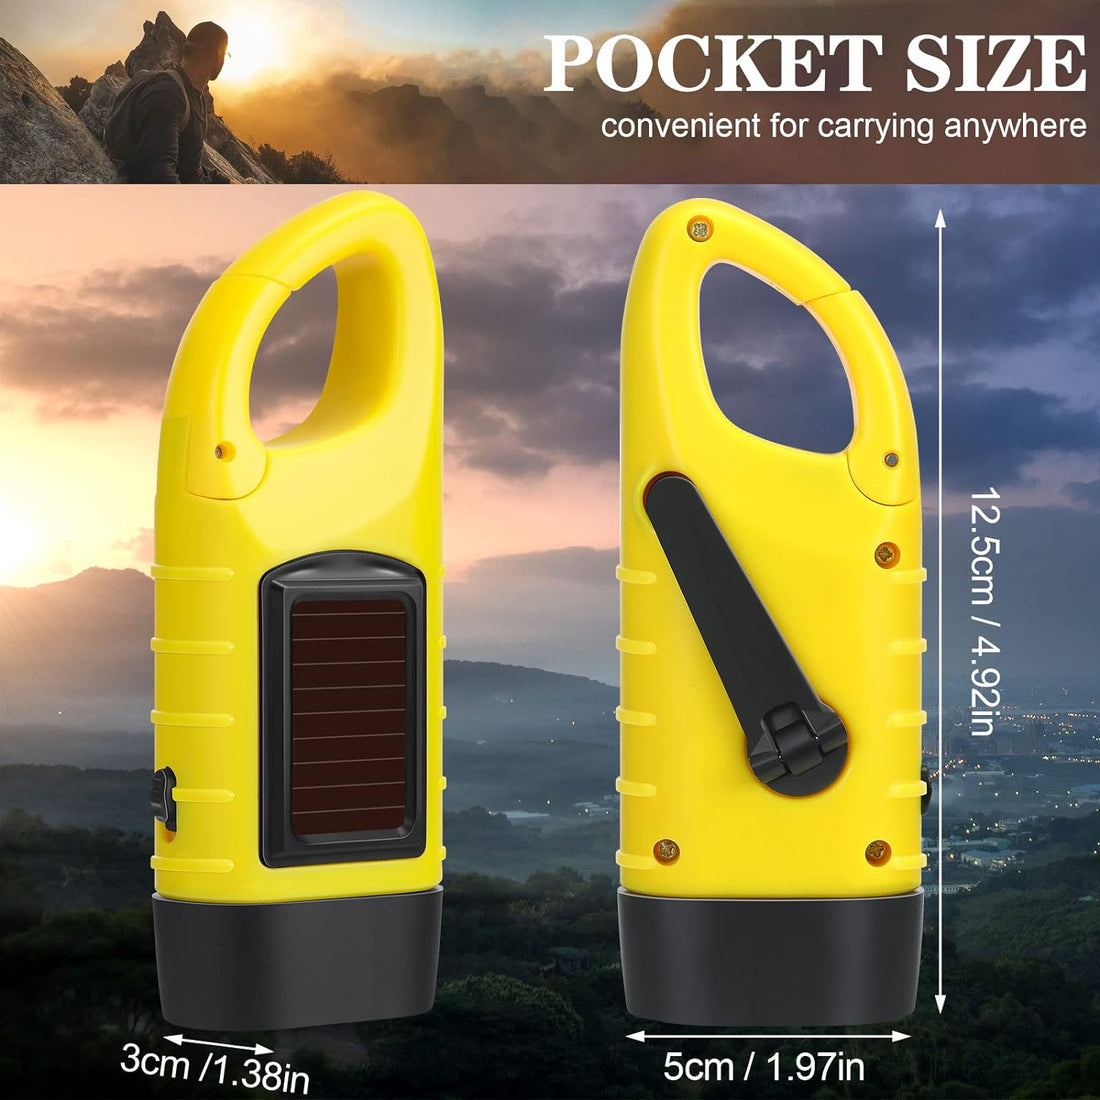 6 Pcs Hand Crank Solar Powered Flashlights Emergency Rechargeable LED Flashlights Handheld Flashlights for Emergencies Survival Gear Outdoor Sports Camping Hiking Backpack Safety, Green Yellow Black